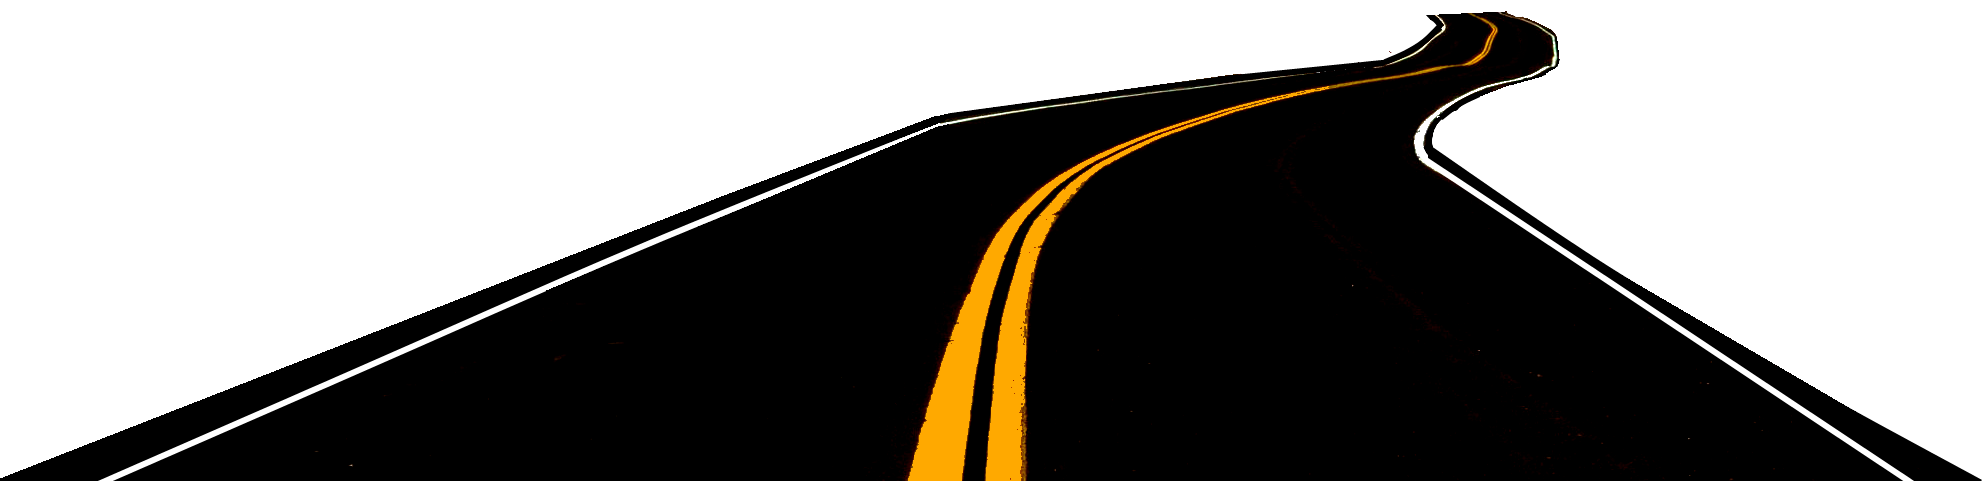 Path clipart curved path. Road png images highway